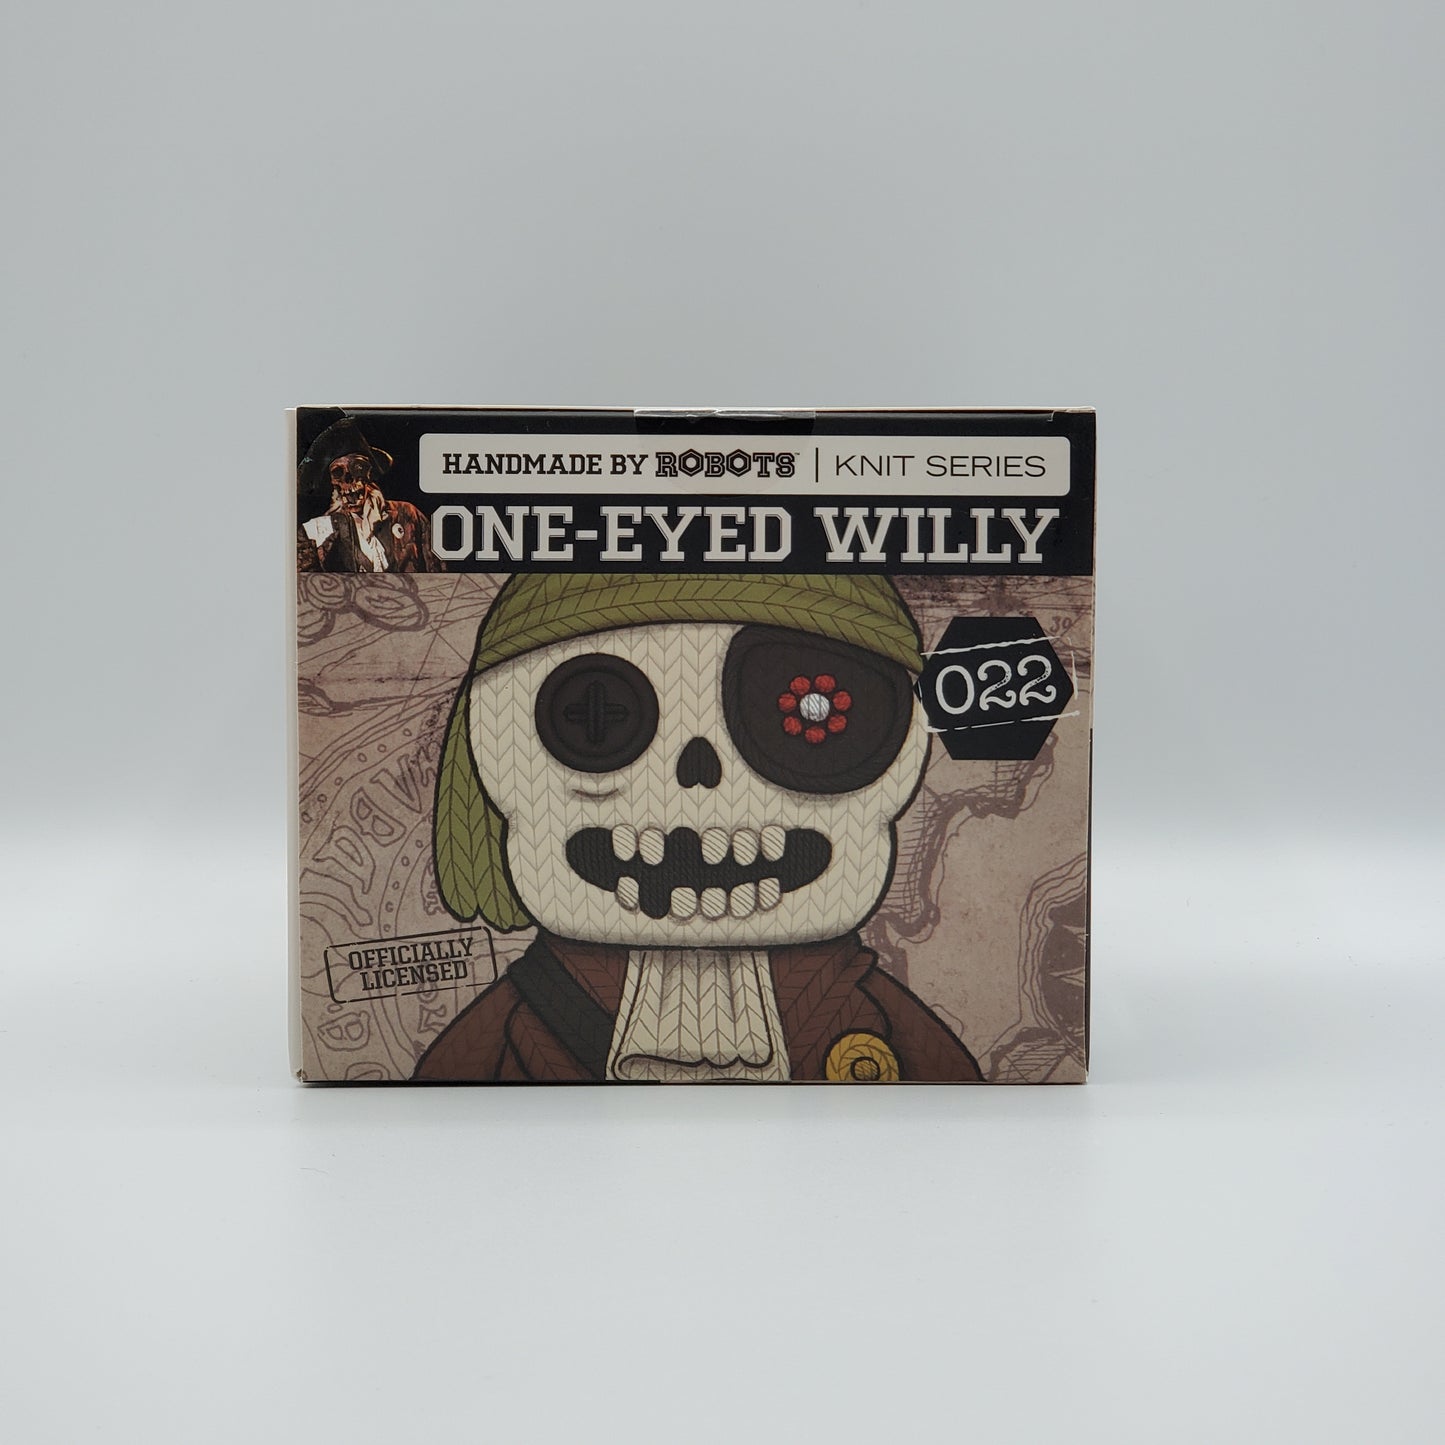 HANDMADE BY ROBOTS - ONE-EYED WILLY